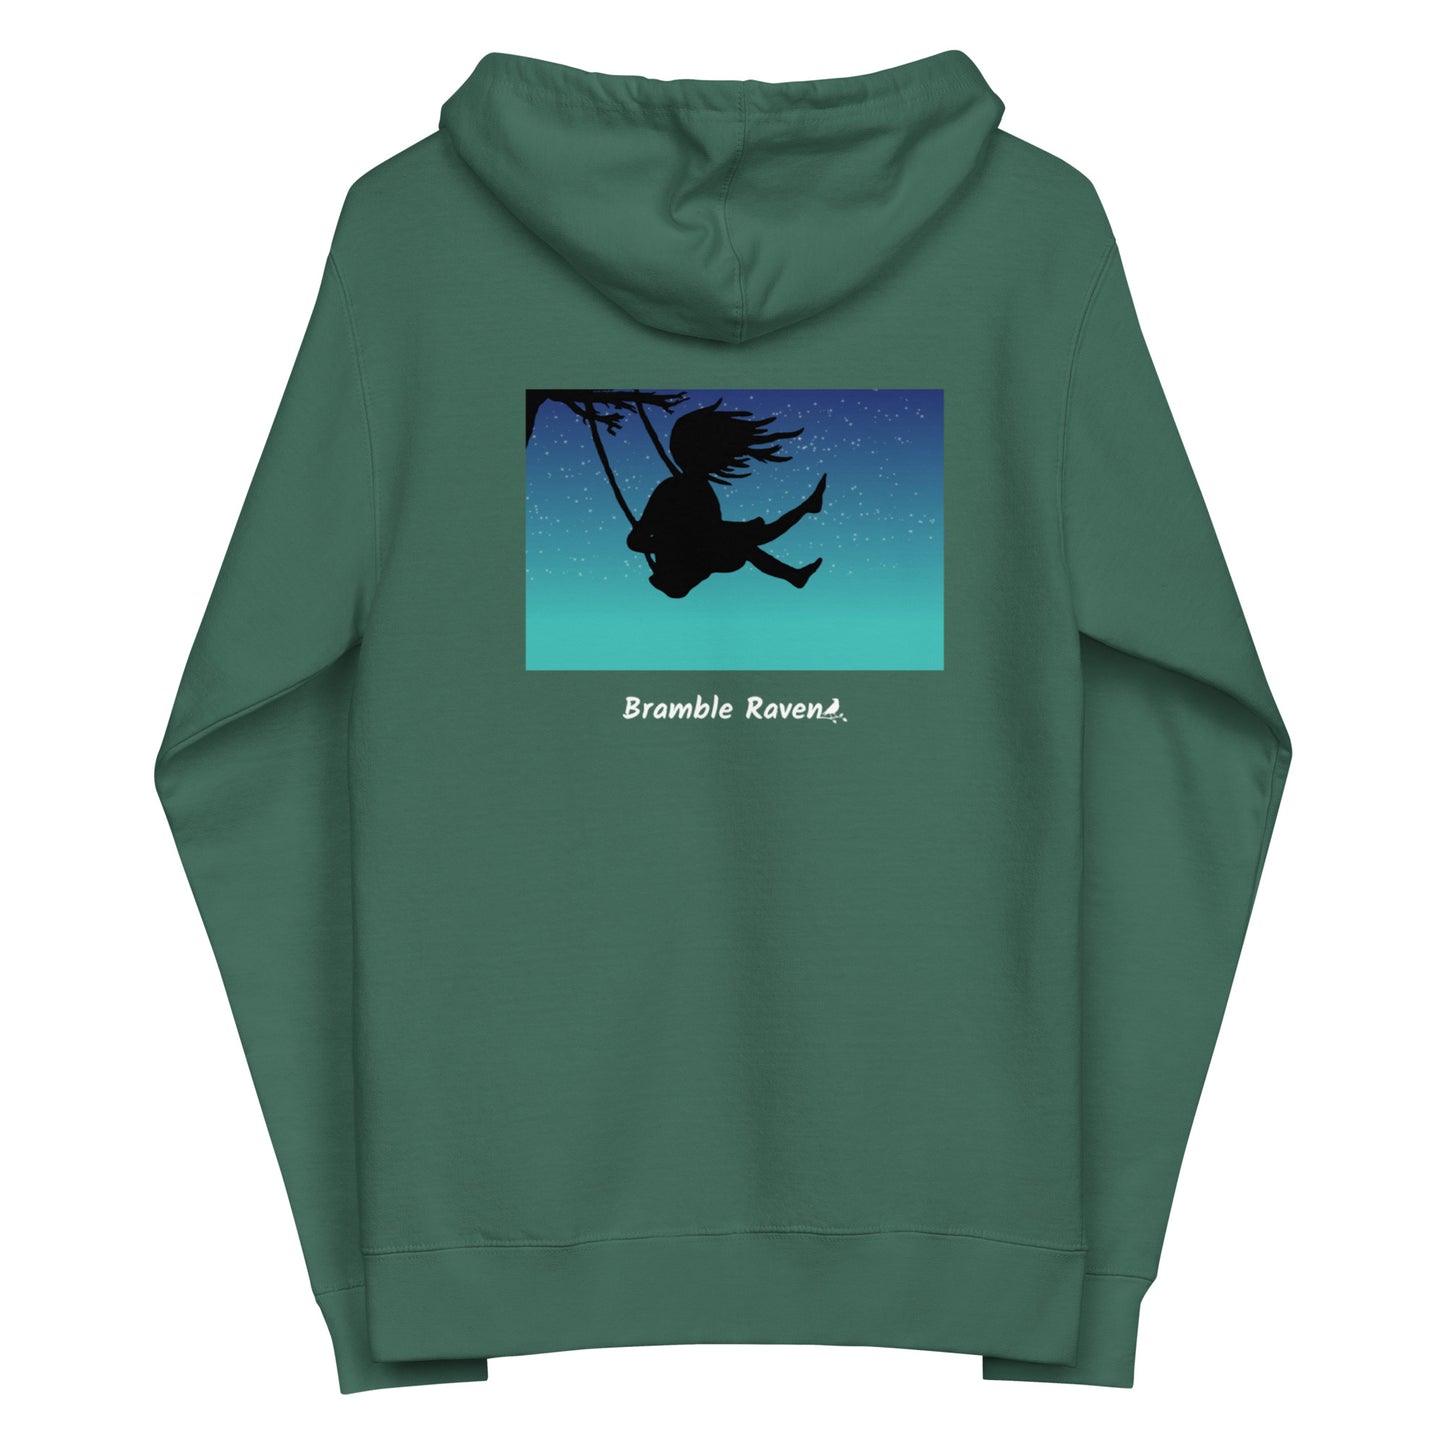 Original Swing Free design of a girl's silhouette in a tree swing against the backdrop of a blue starry sky. Rectangular image on the back of a unisex fleece-lined alpine green colored zip up hoodie.